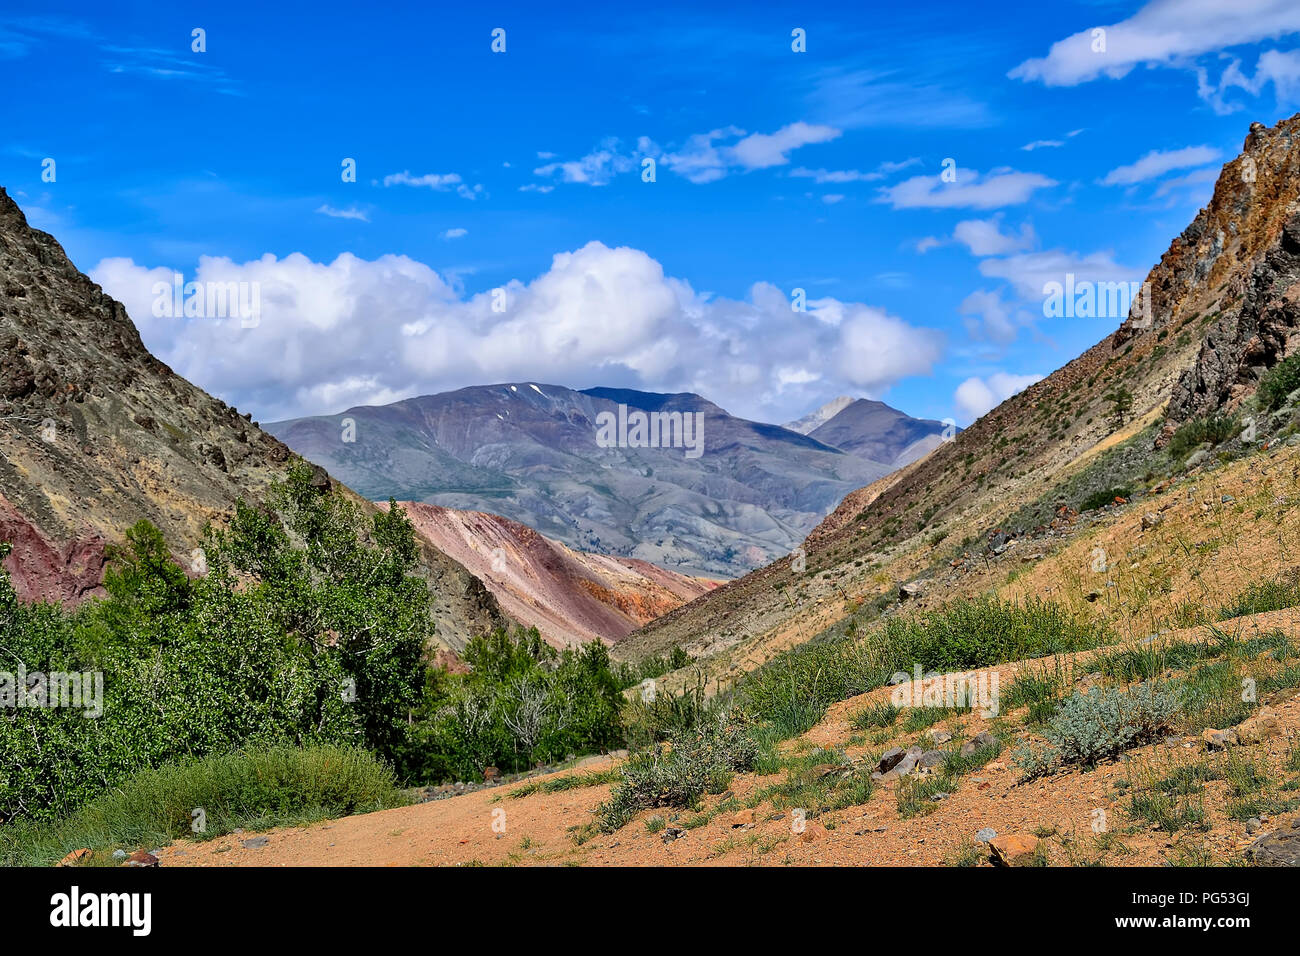 Picturesque summer mountain landscape - view from the canyon of Kyzyl Chin with multicolored clay cliffs to the Kuray Range, Altai mountains, Russia.  Stock Photo